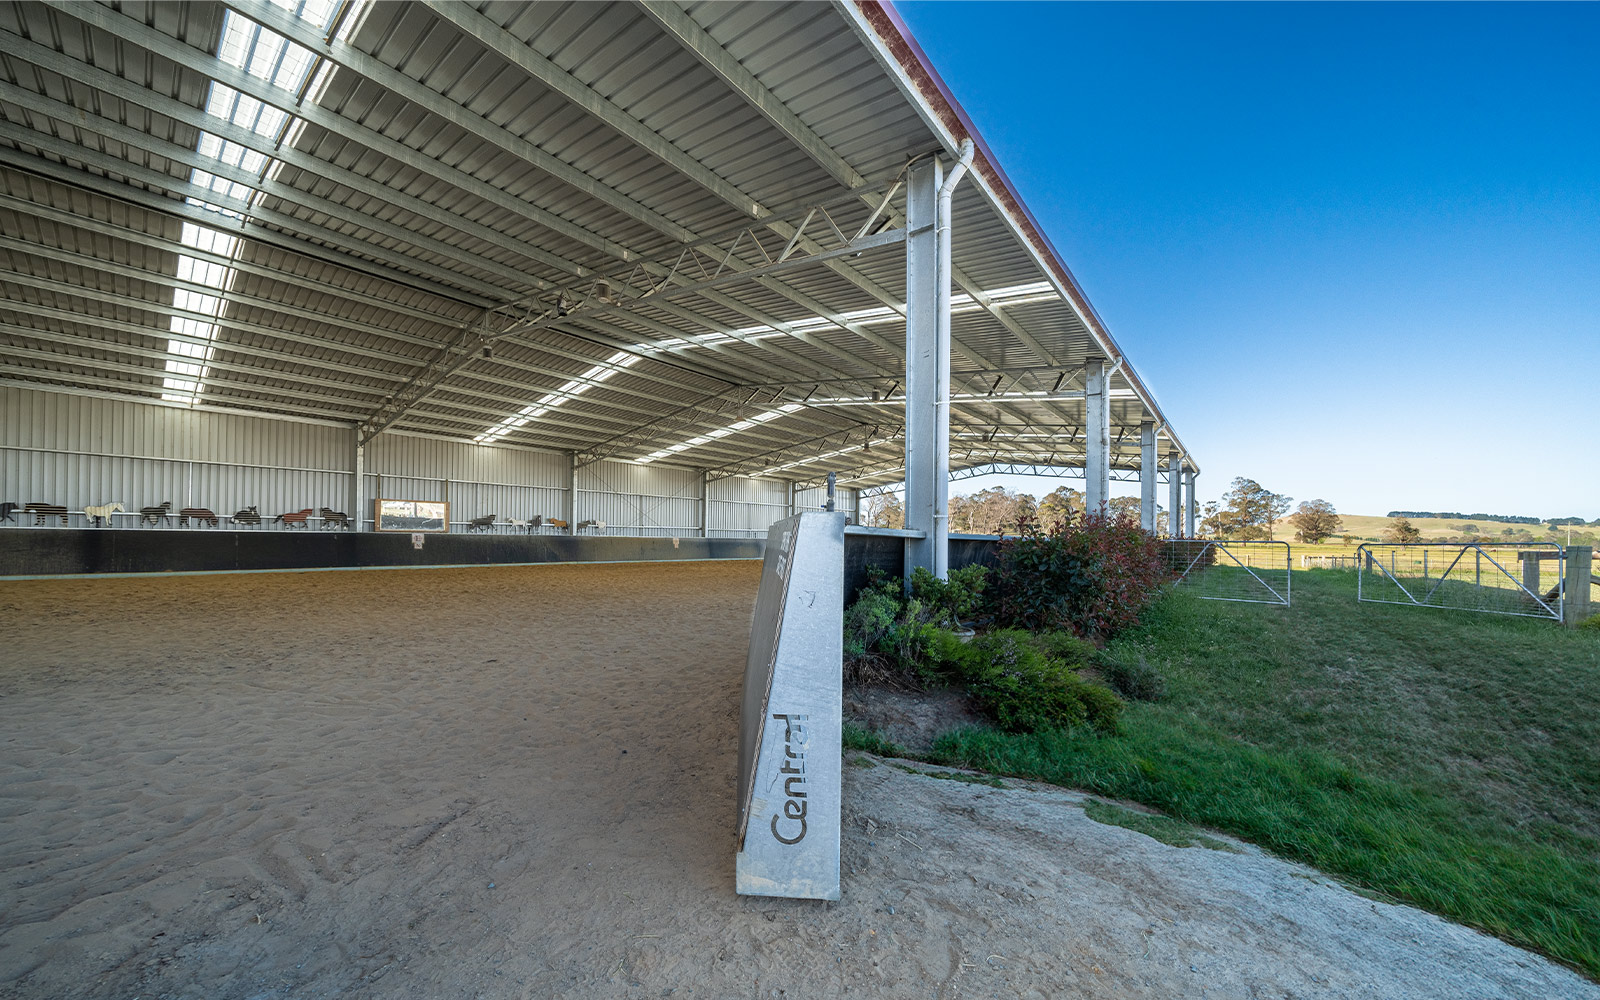 Roof cover horse arena